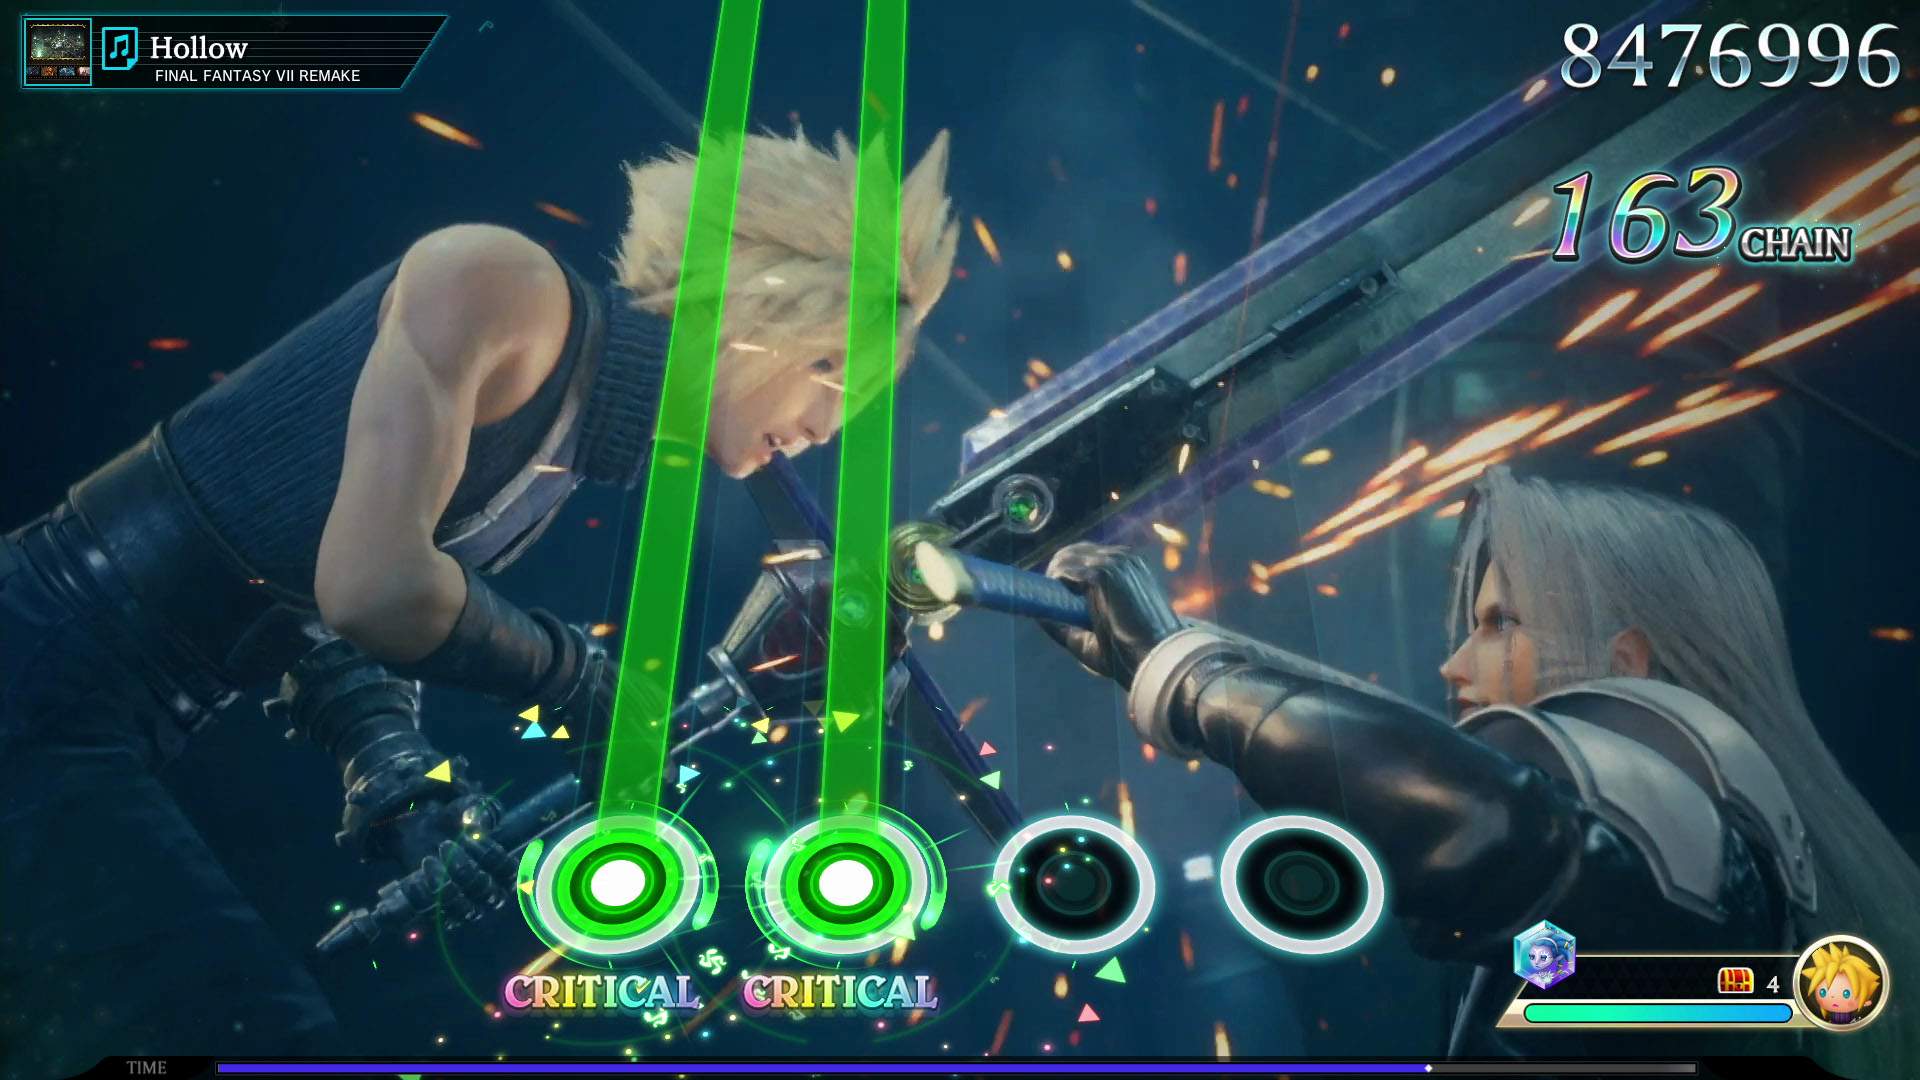 Cloud faces off with Sephiroth with the music of "Hollow" from FINAL FANTASY 7 REMAKE